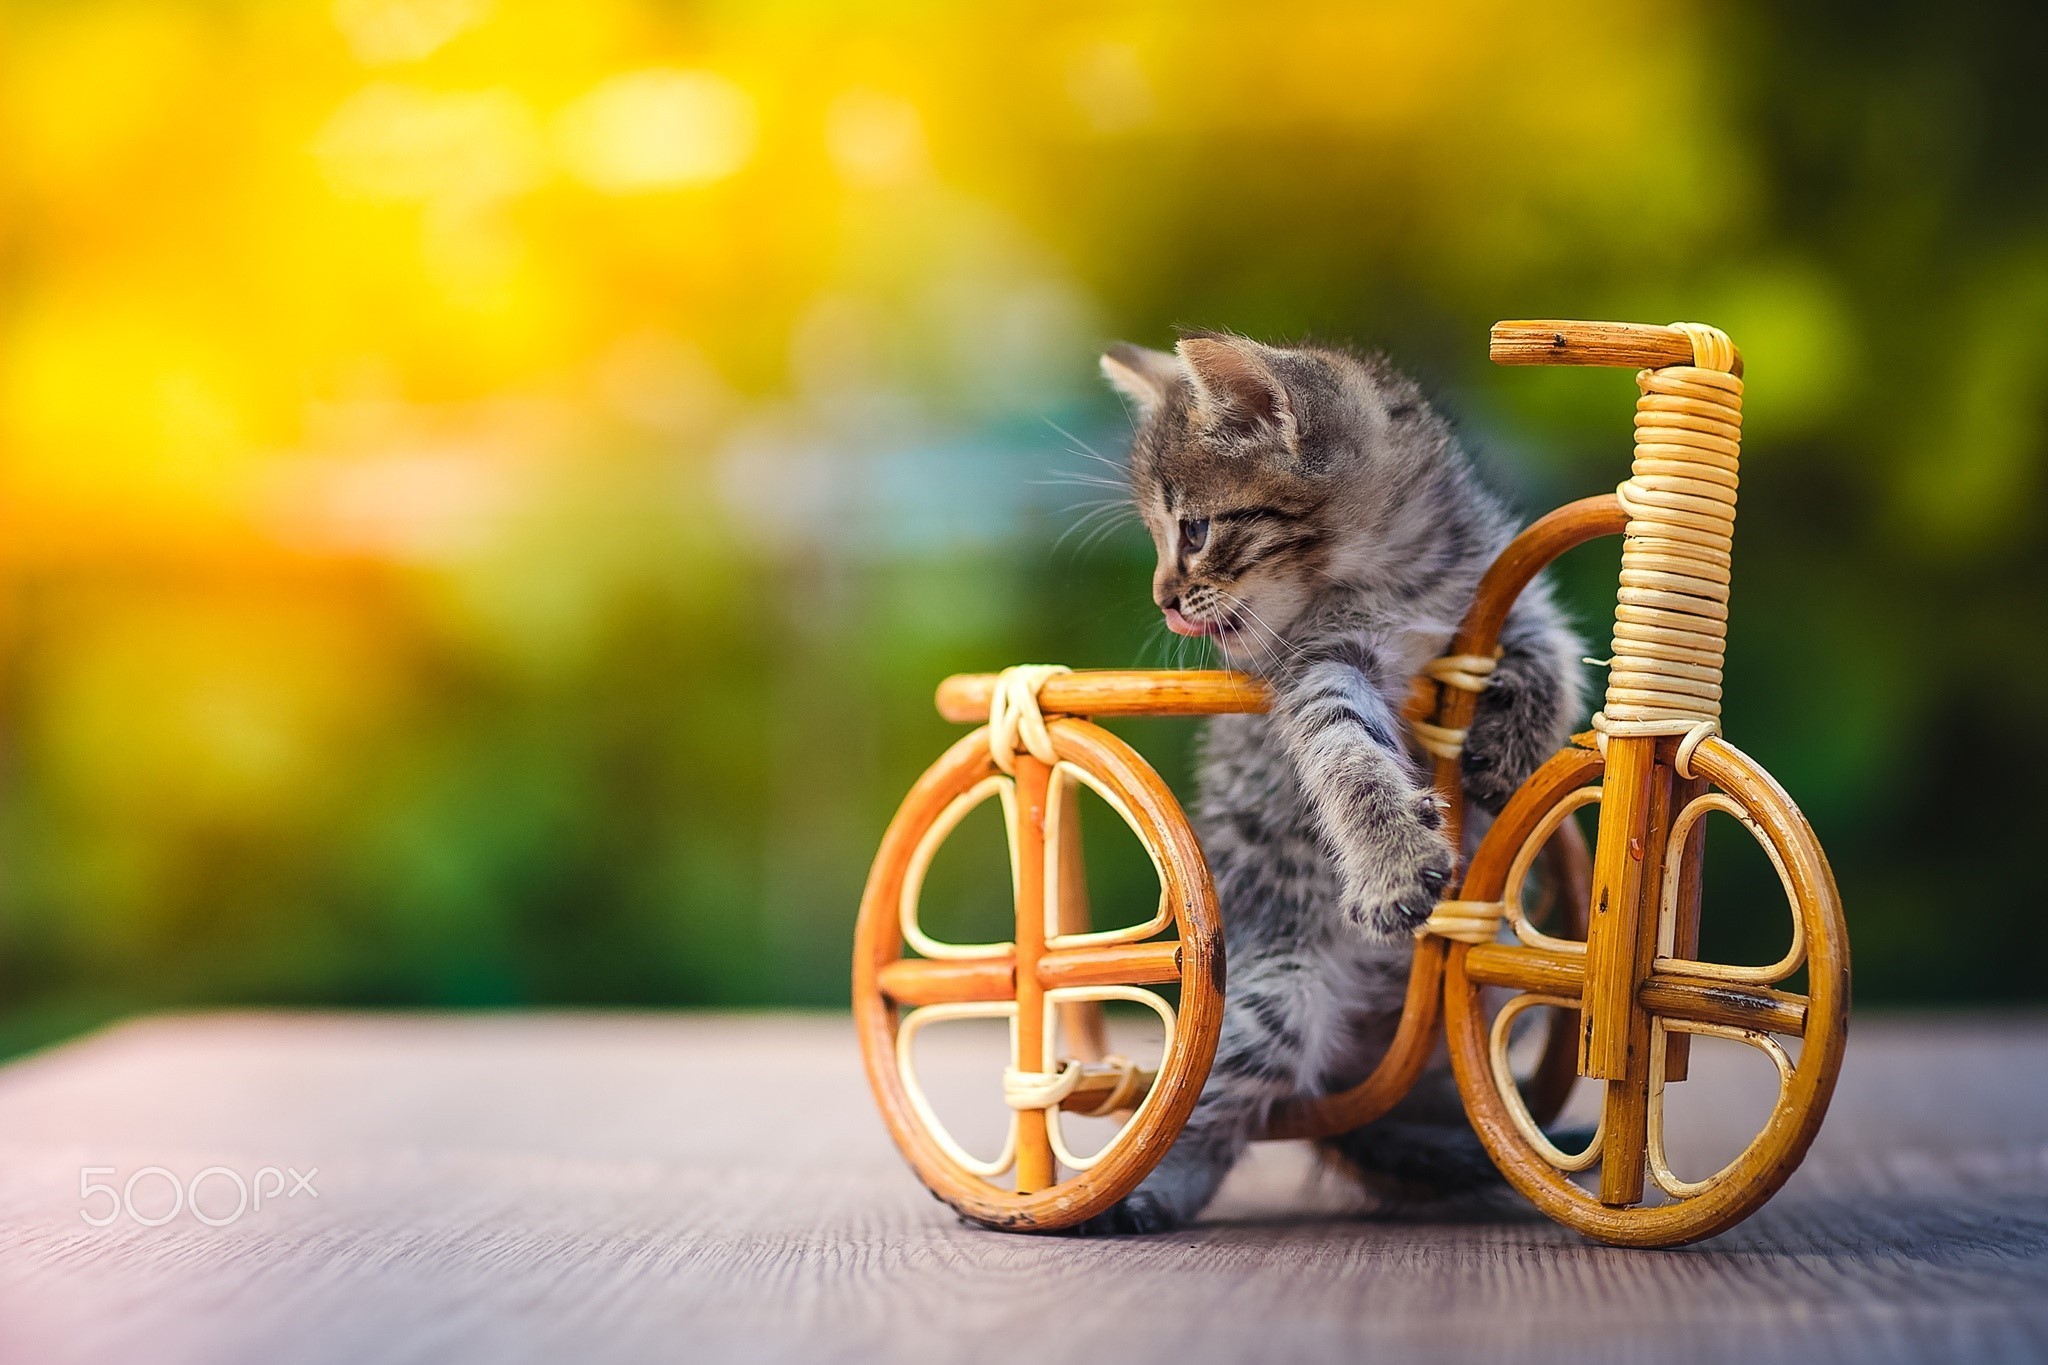 General 2048x1365 nature animals cats kittens baby animals bicycle miniatures wood wooden surface depth of field outdoors closeup